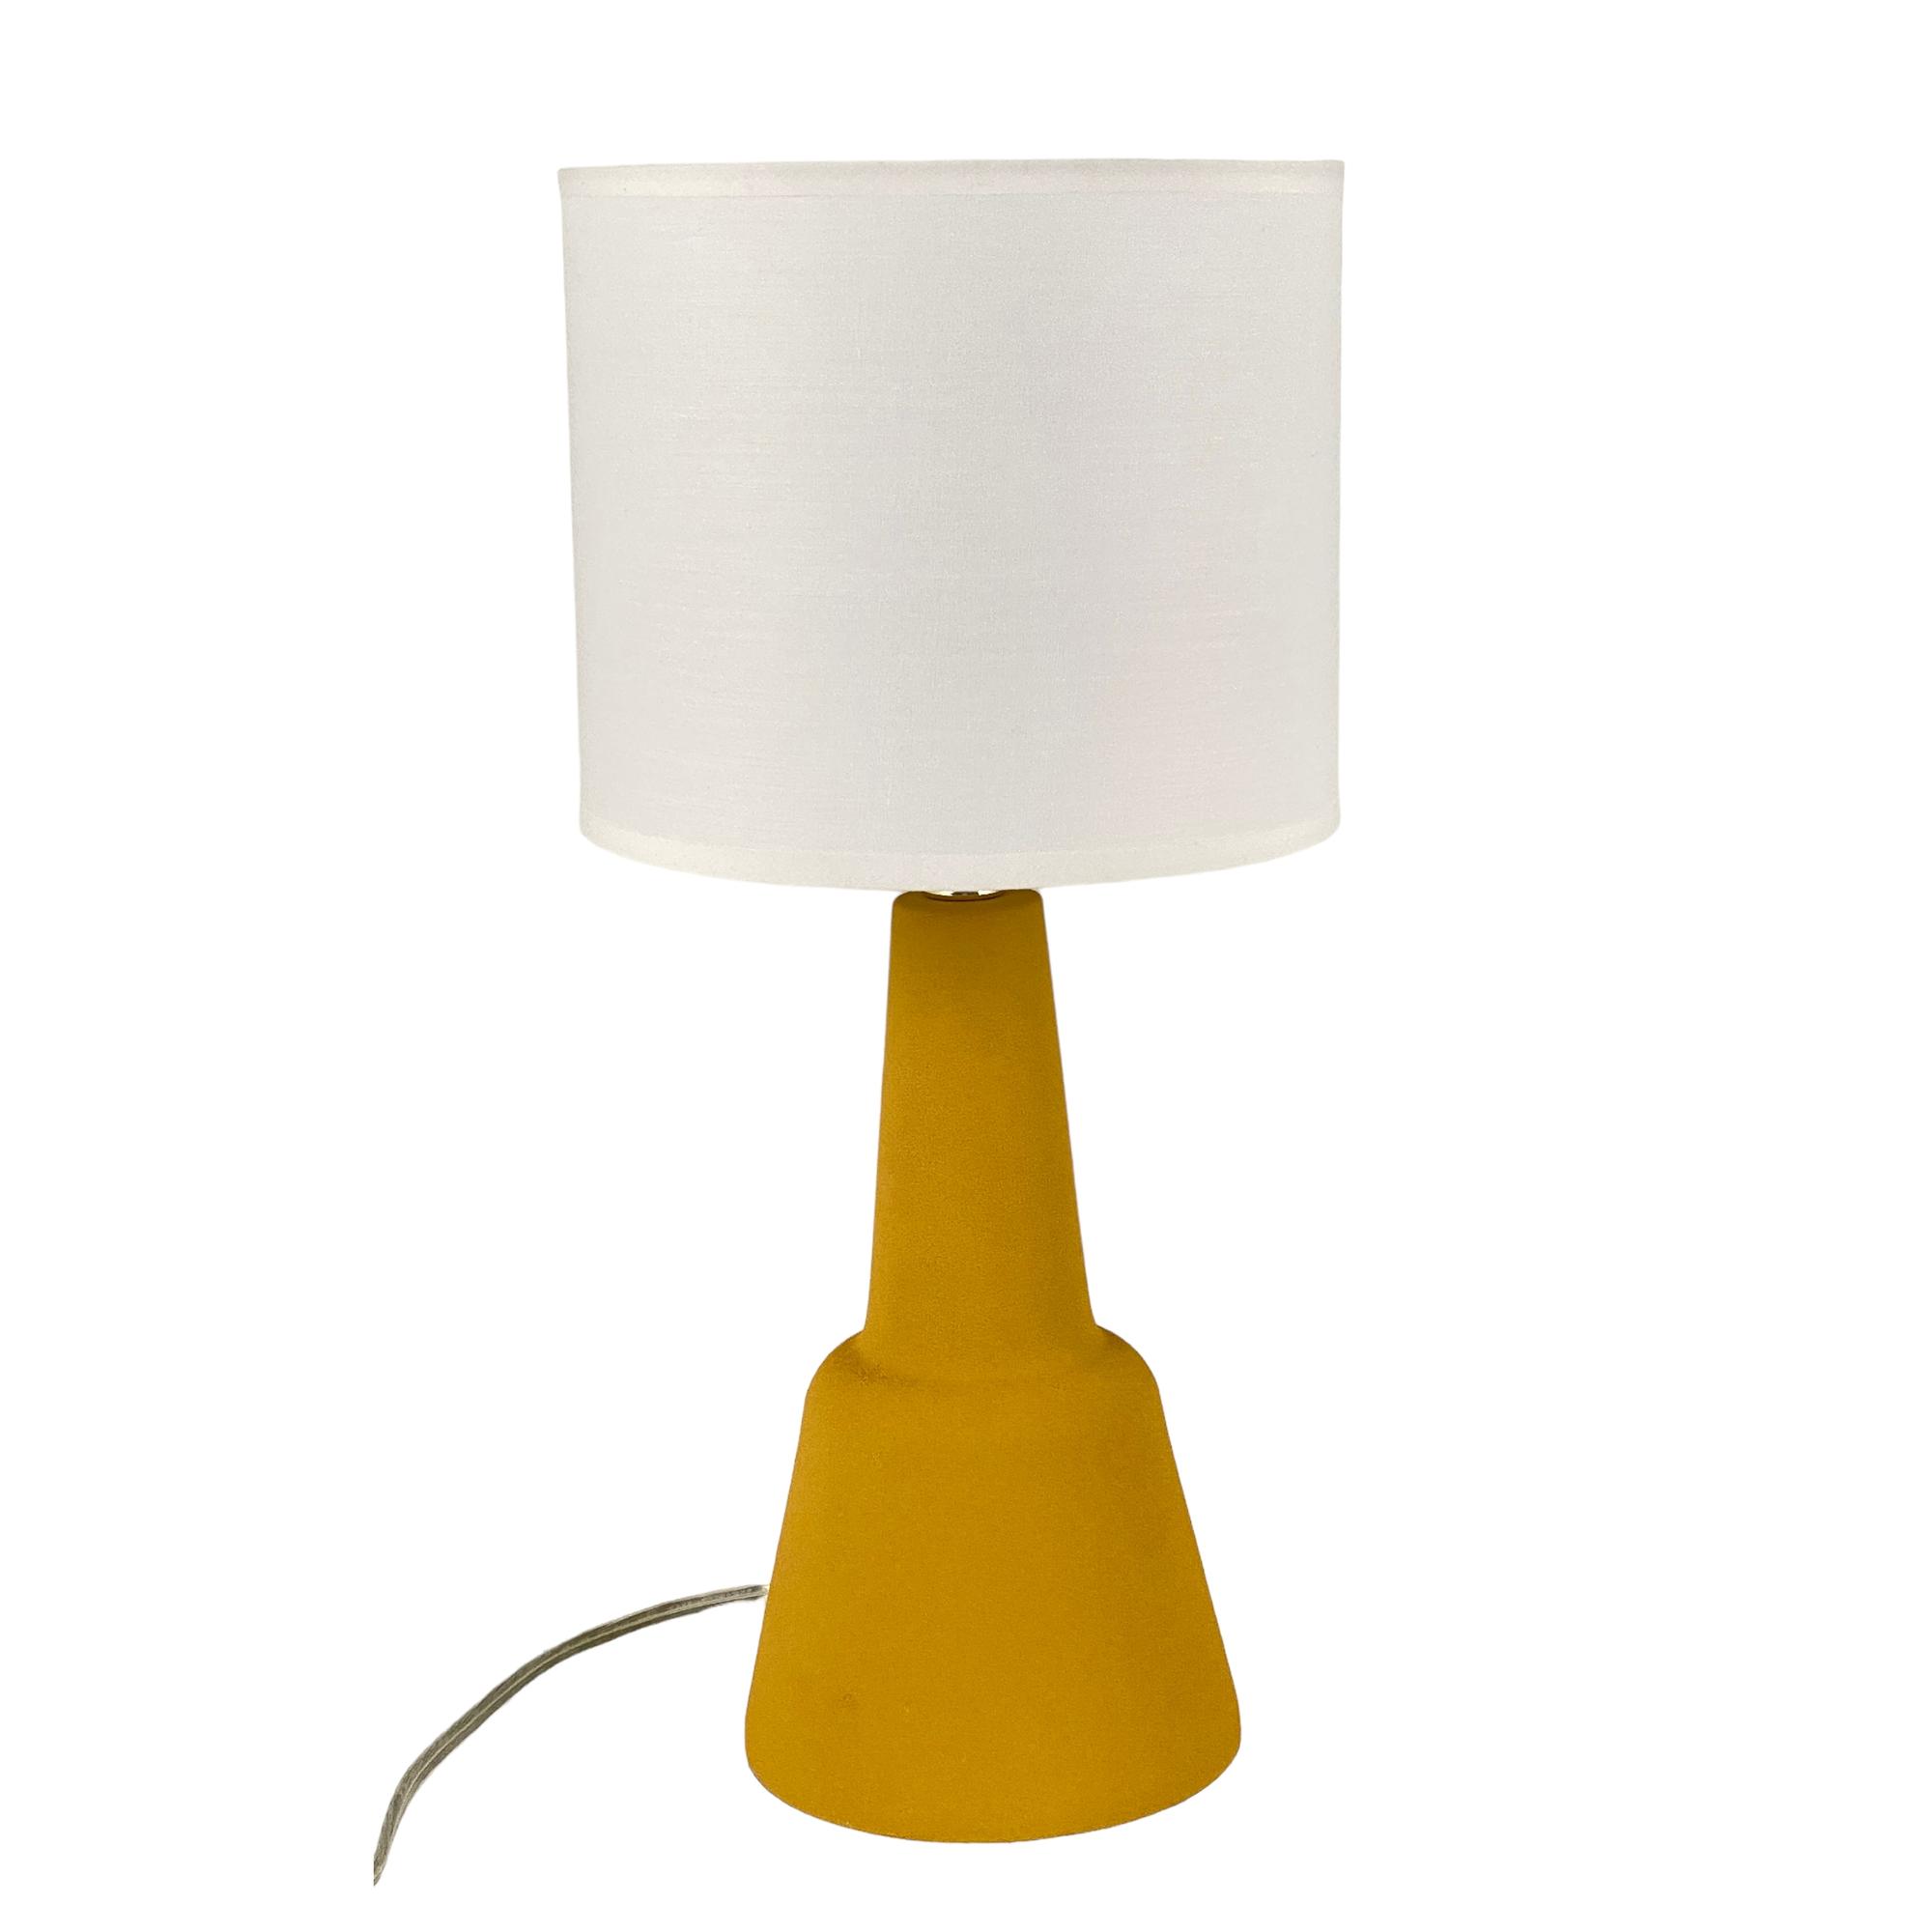 TABLE LAMP - 541-491336/1